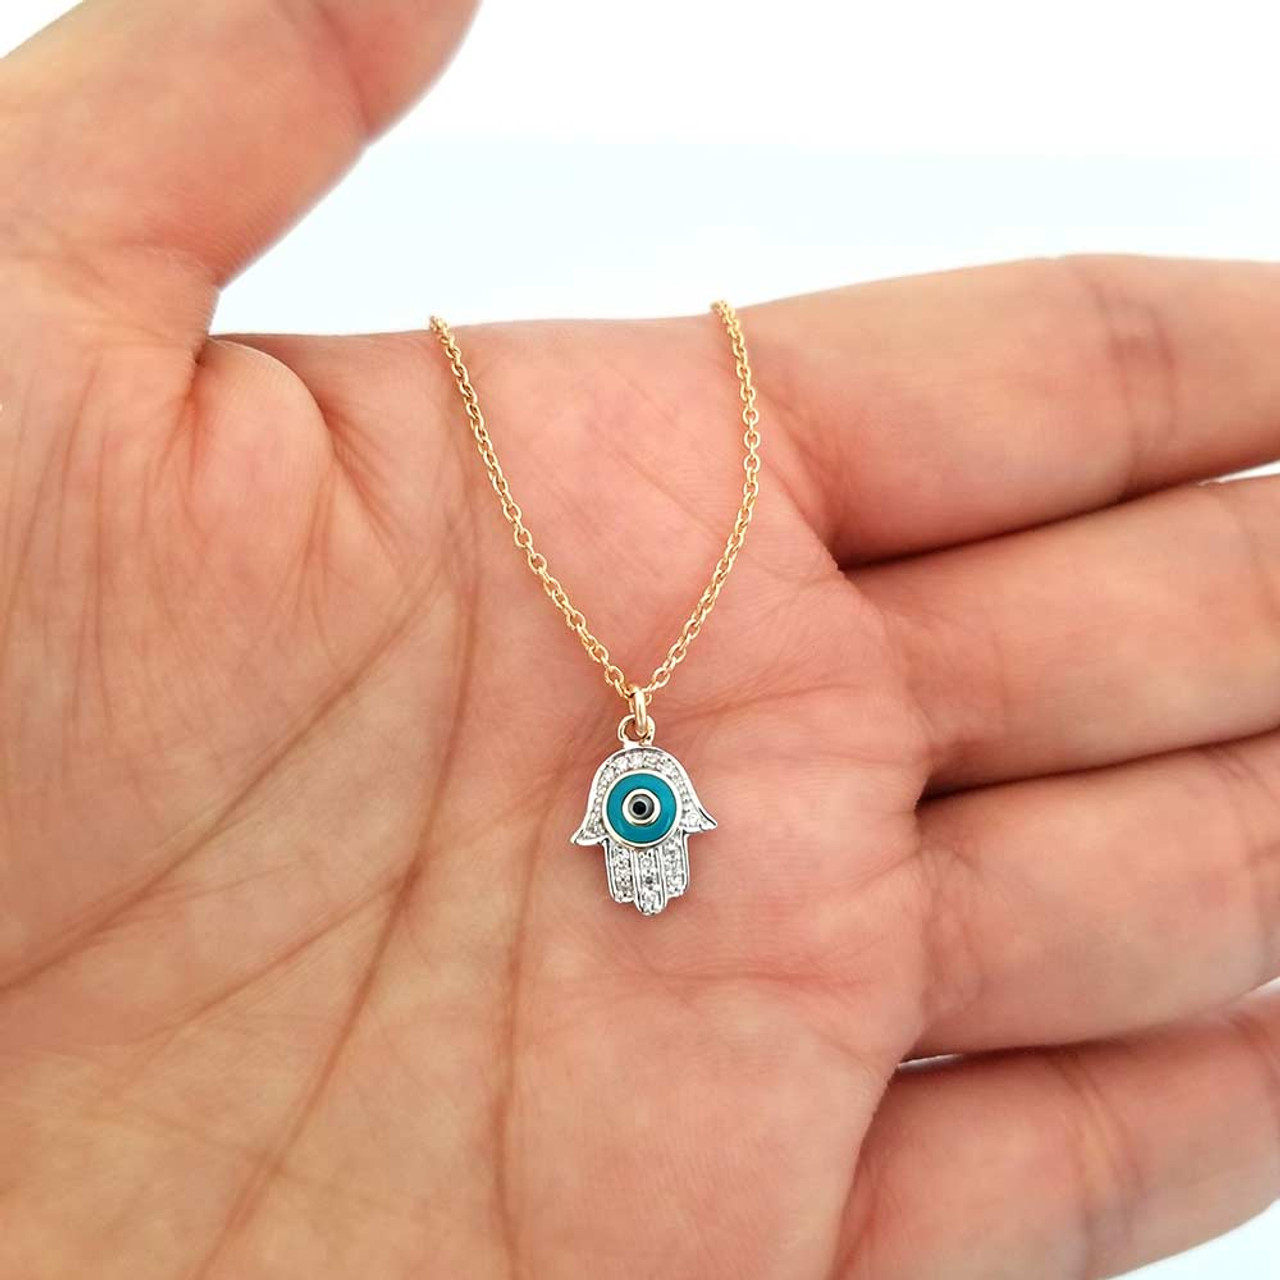 Buy Long tiantian Men's and Women's Turkish Glass Leather Copper Rope Evil  Eye Lucky Protection Necklace- Blue at Amazon.in